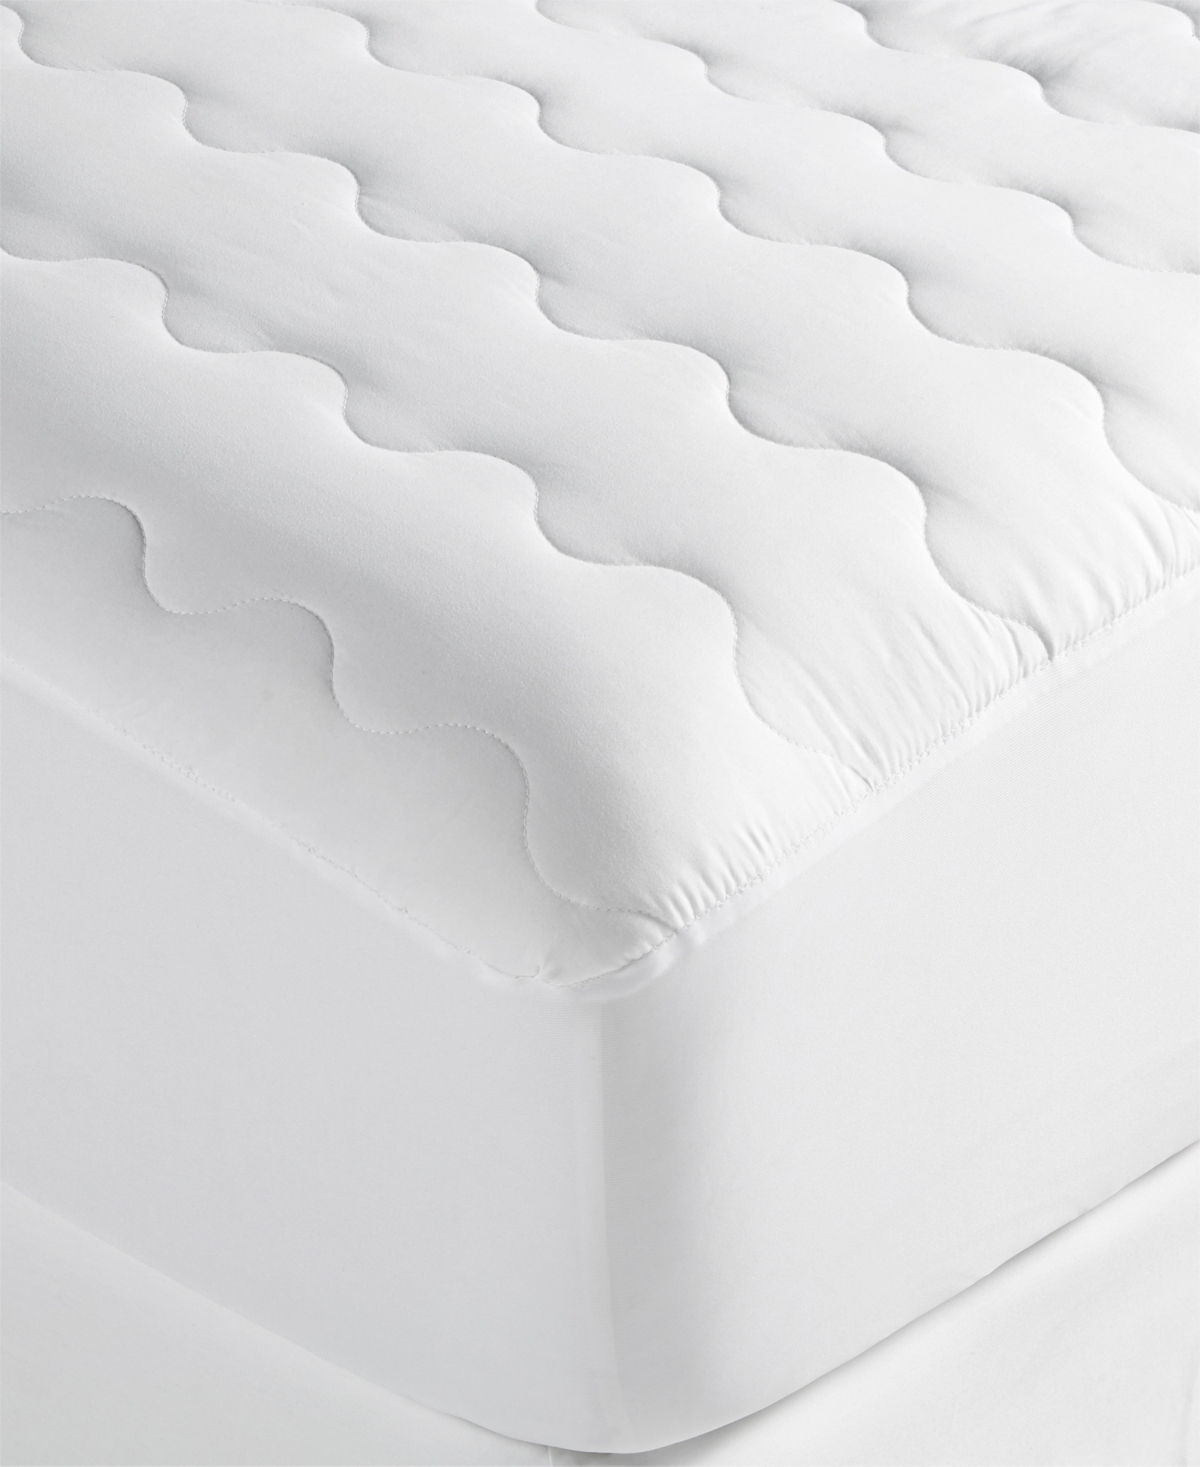 Shop Home Design Easy Care Waterproof Mattress Pads, Full, Created For Macy's In White